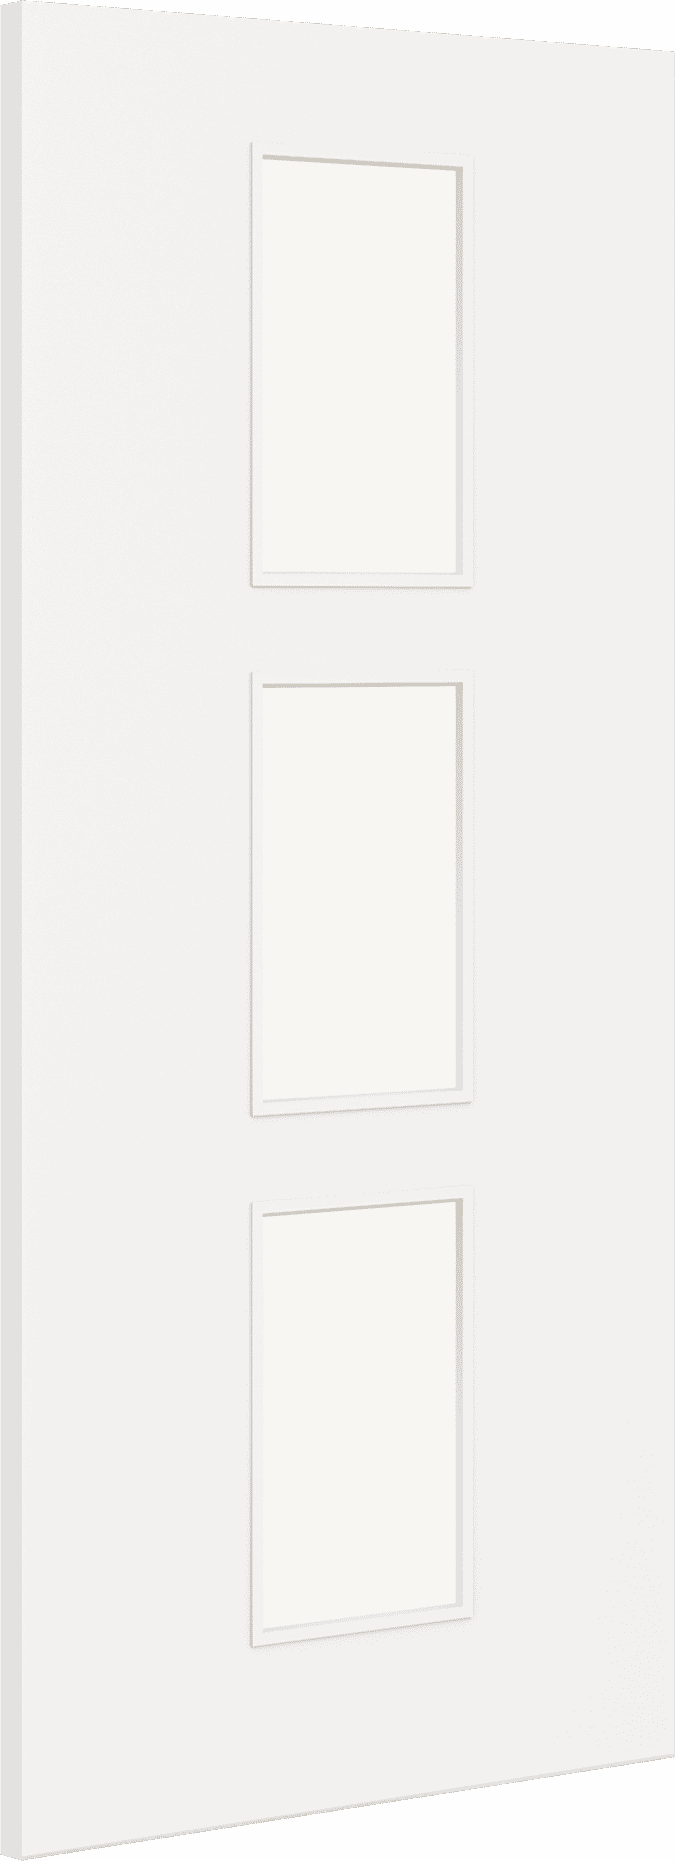 2040mm x 626mm x 44mm Architectural Paint Grade White 11 Frosted Glazed Fire Door Blank